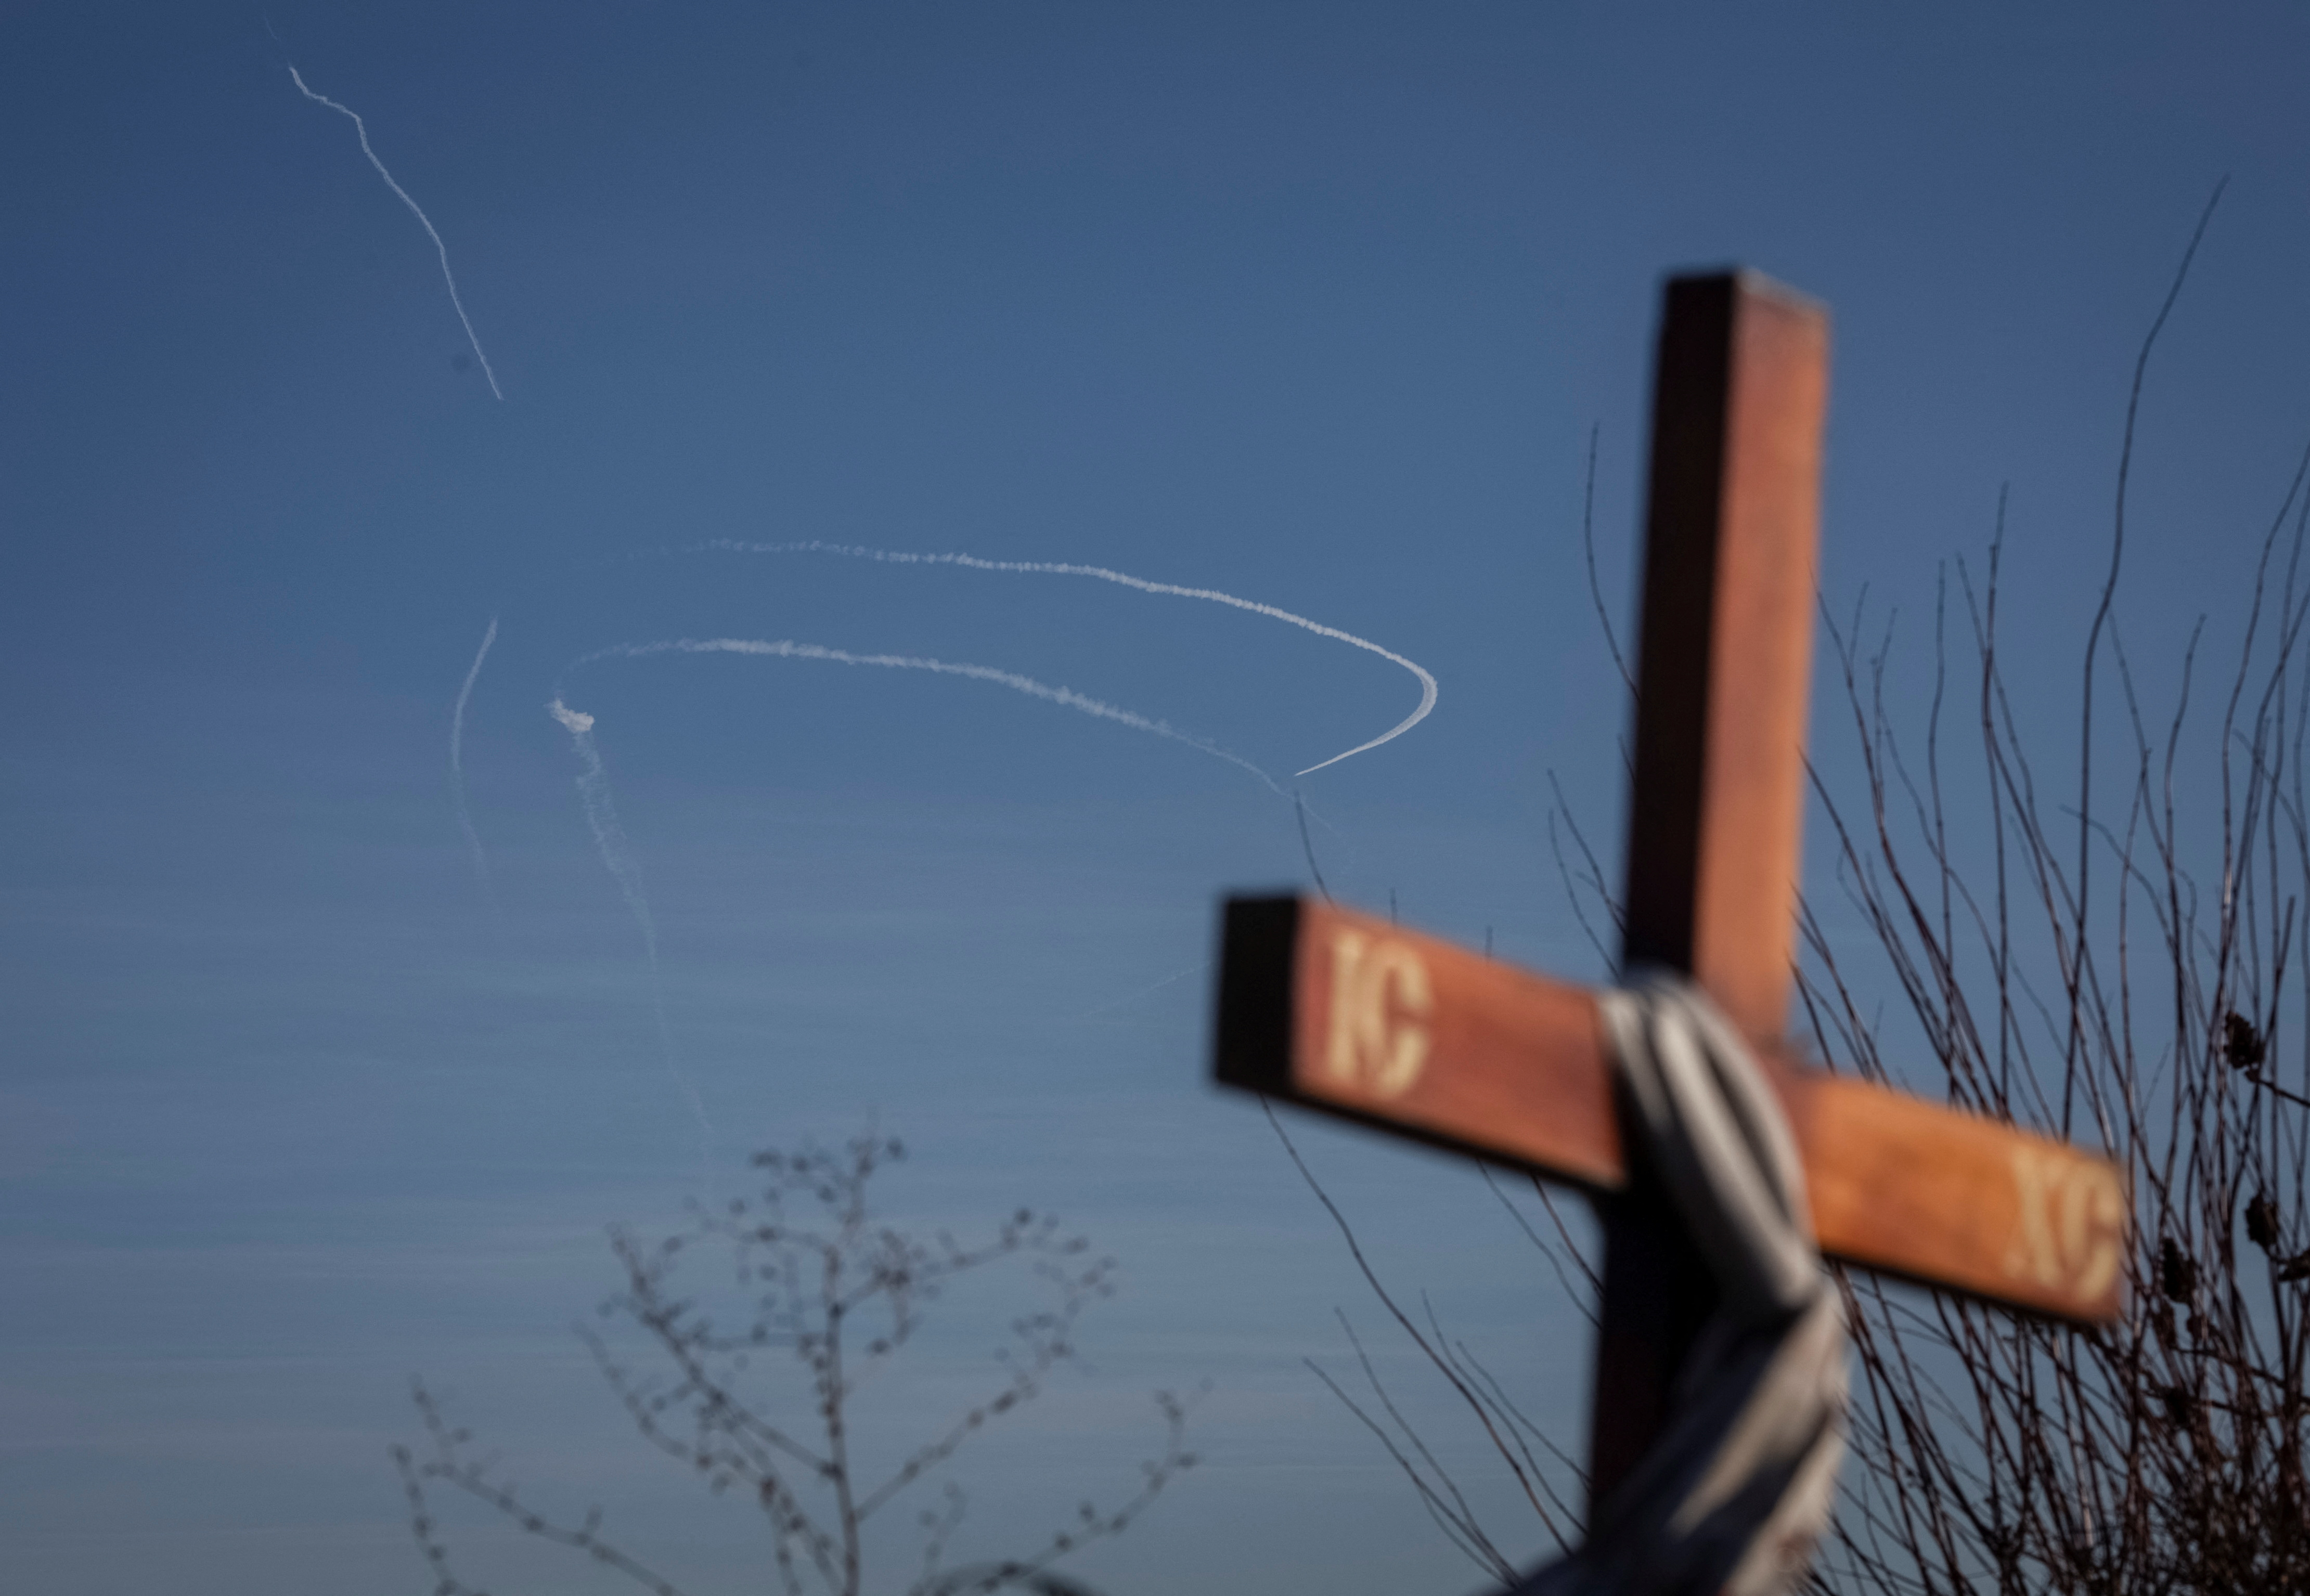 A missile trace is seen in a sky, as Russia's attack on Ukraine continues, near Bakhmut